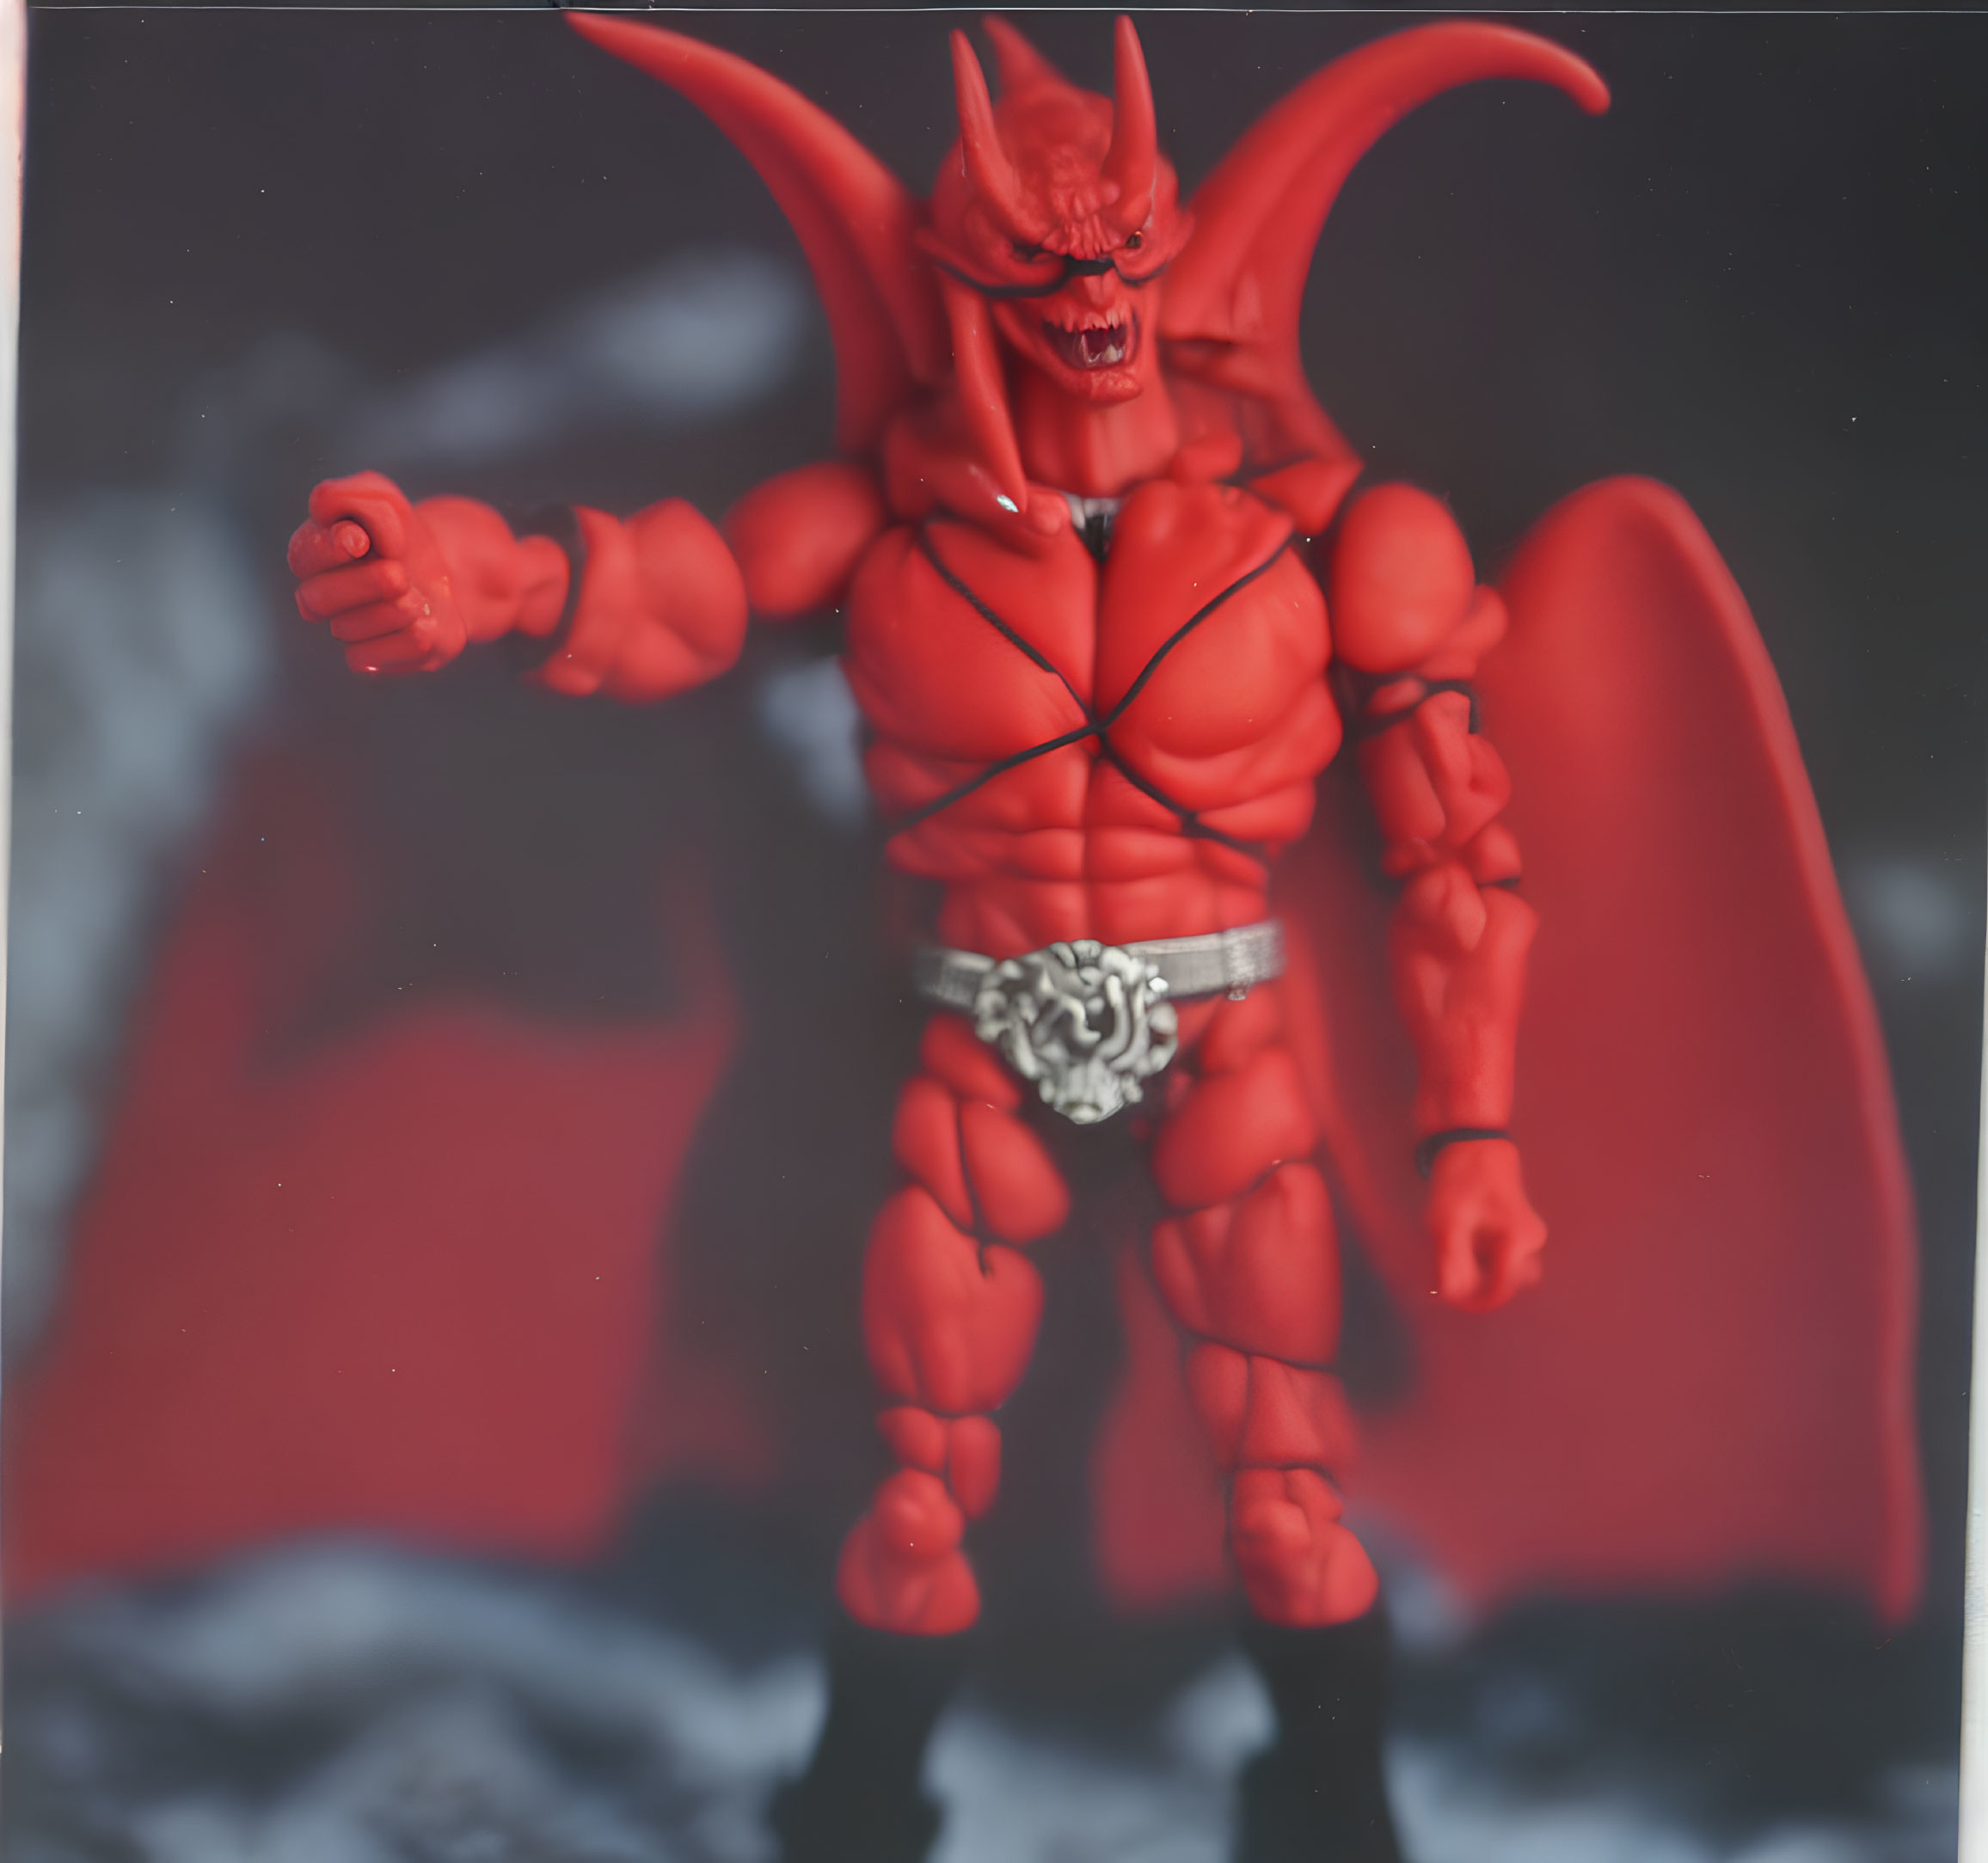 Red devil action figure with horns and wings in smoky backdrop.